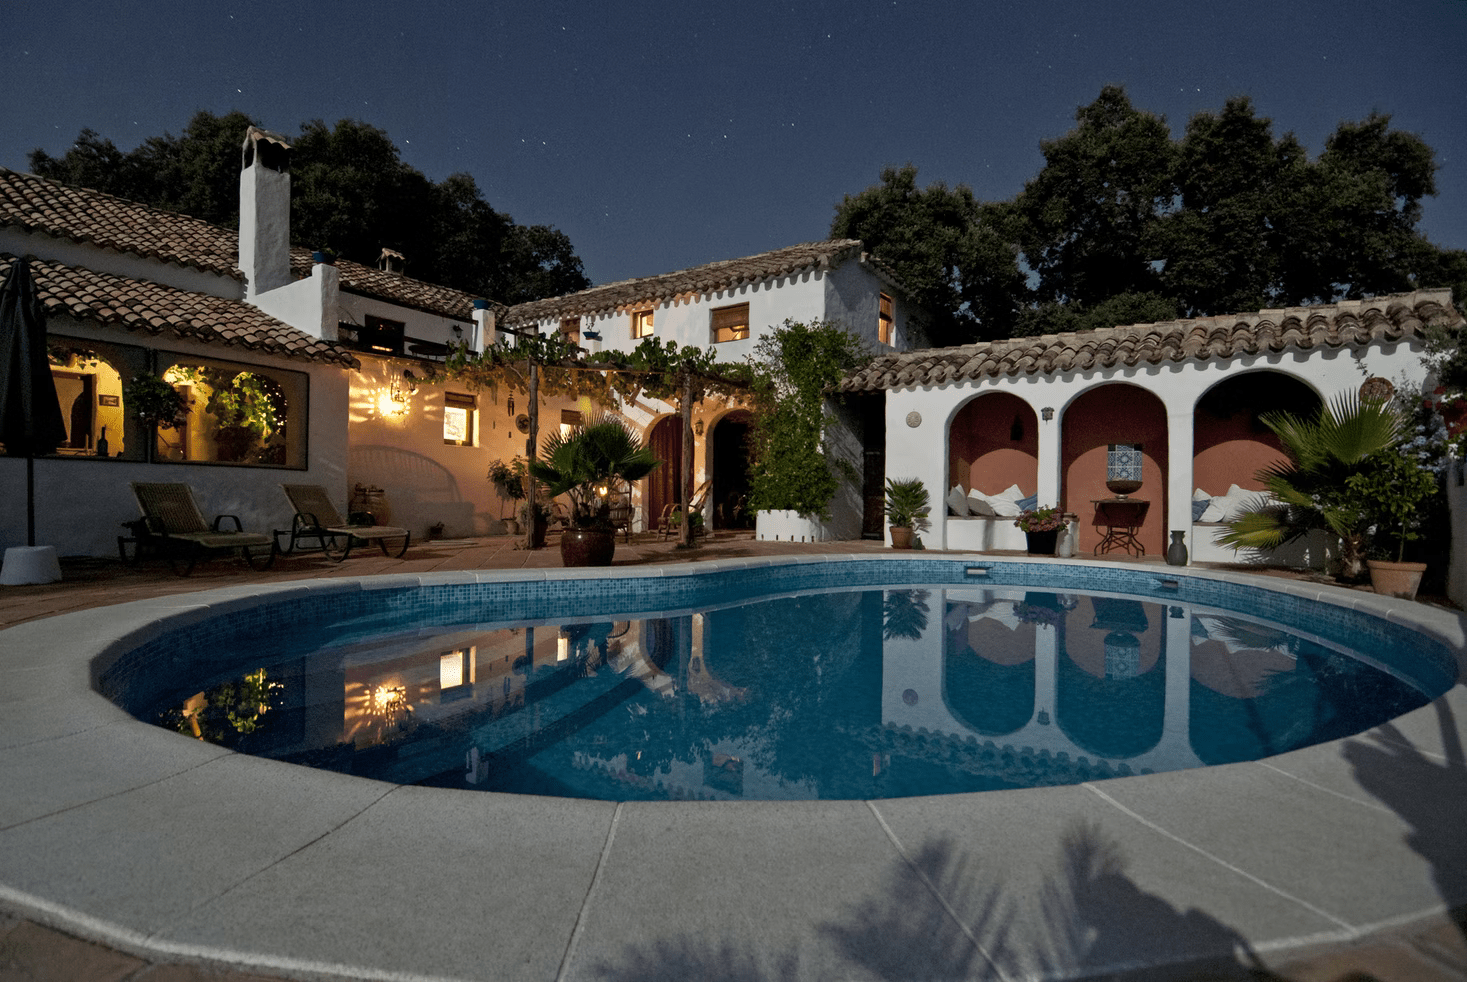 house in the evening light with a large swimming pool